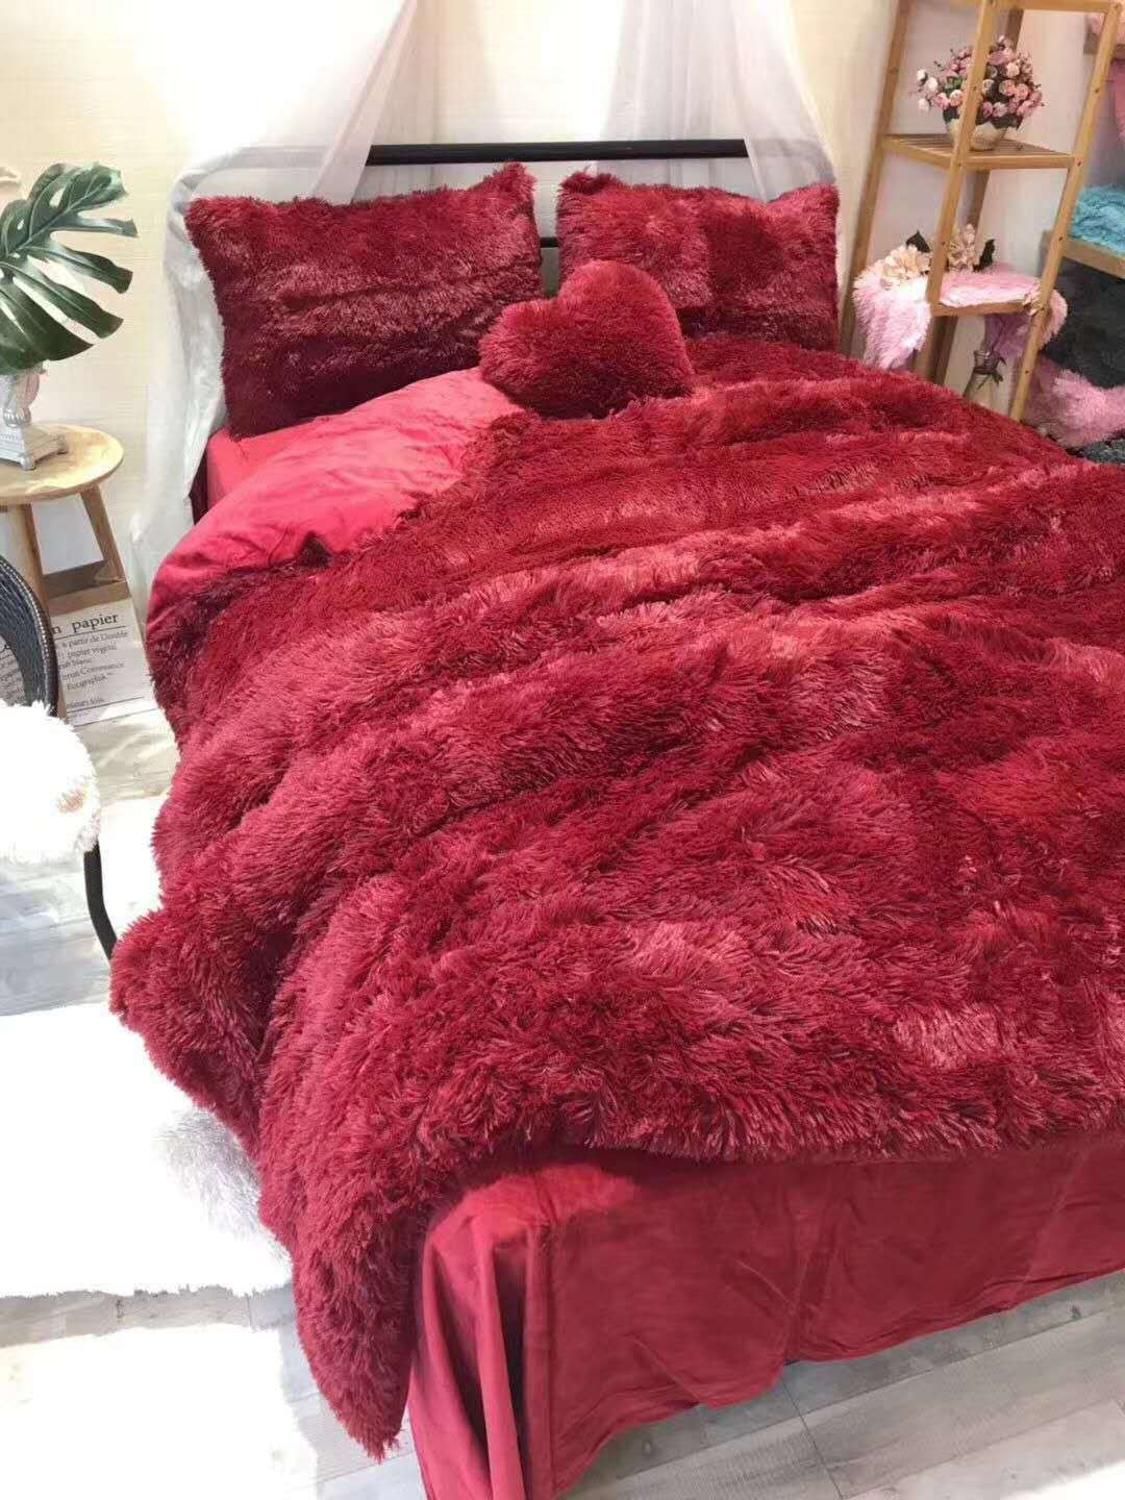 Red Coral Velvet Duvet Cover Bed Sheet Pillow Case Ditwoon